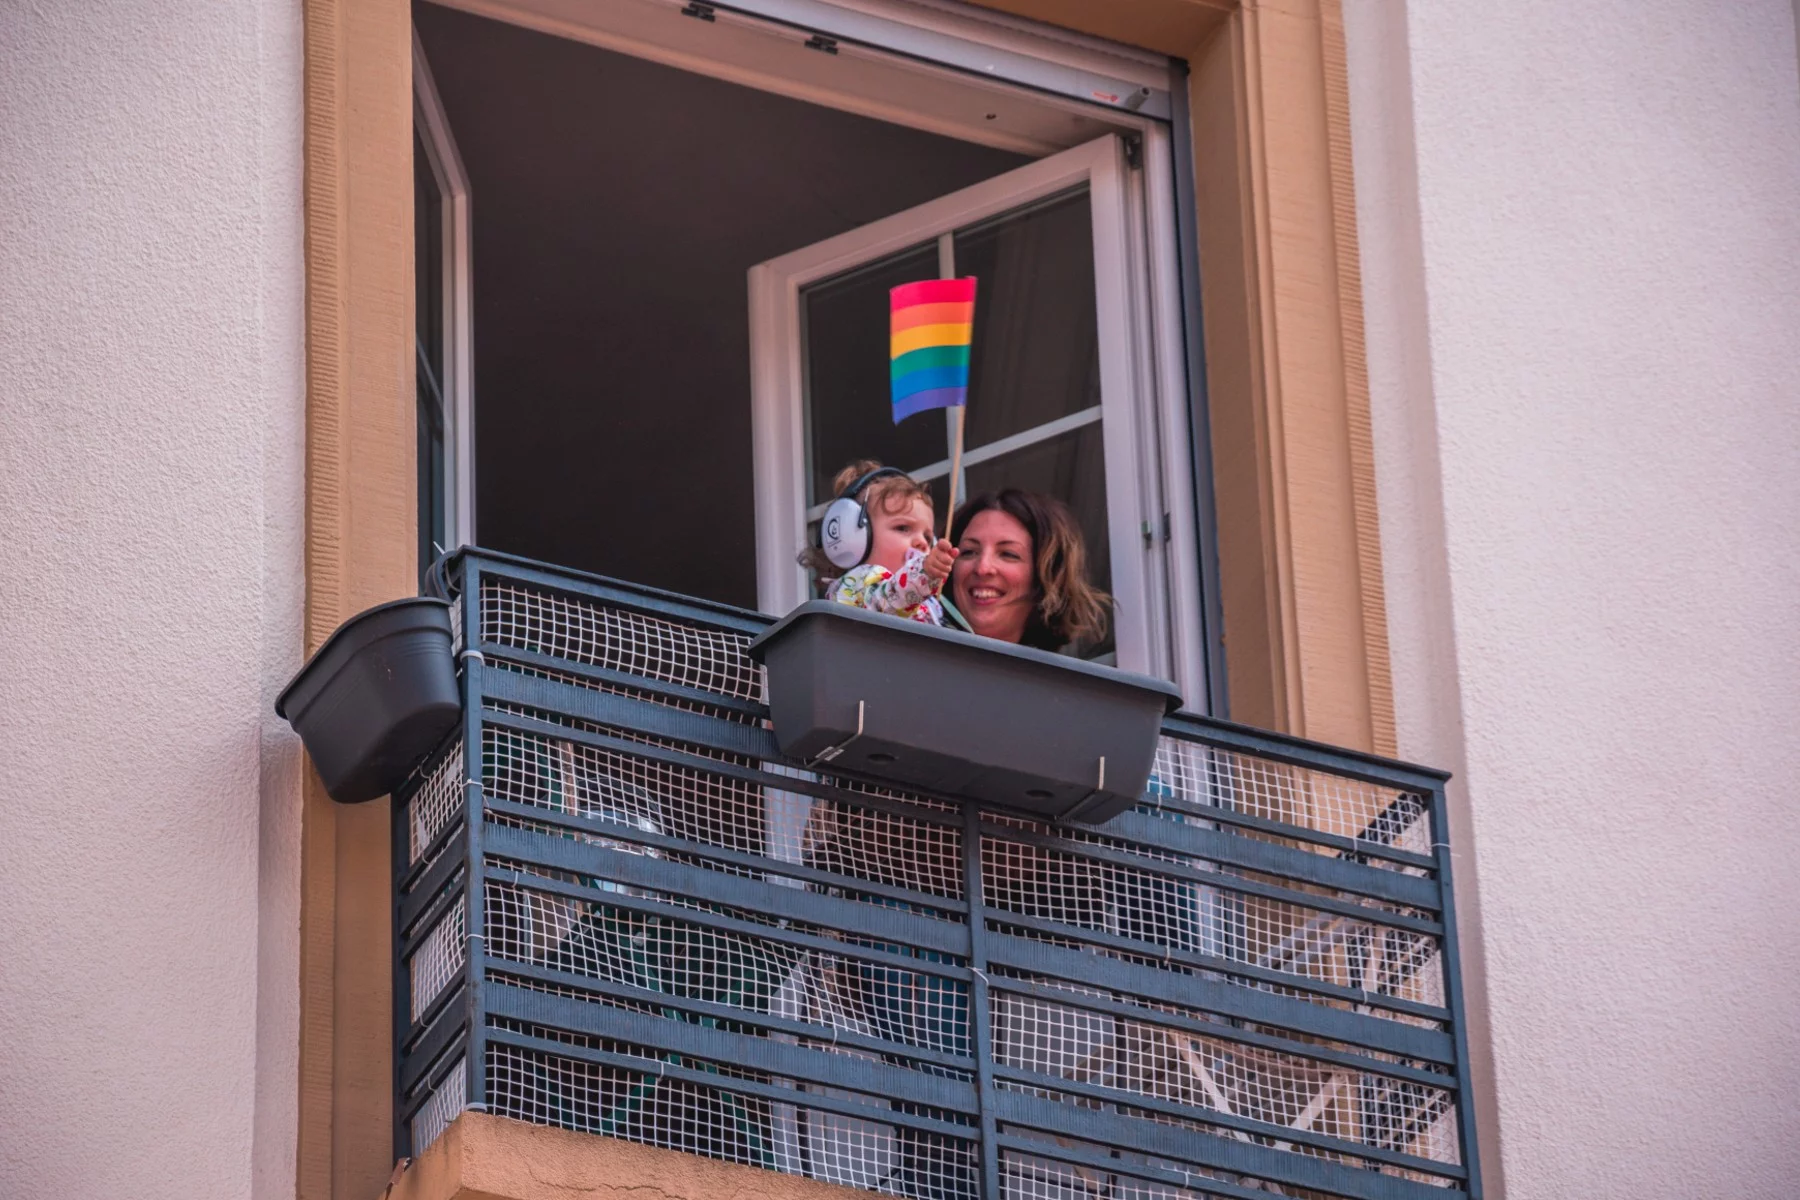 Mother and baby standing at a balcony. The baby is holding a rainbow flag, while their mother looks at them adoringly.